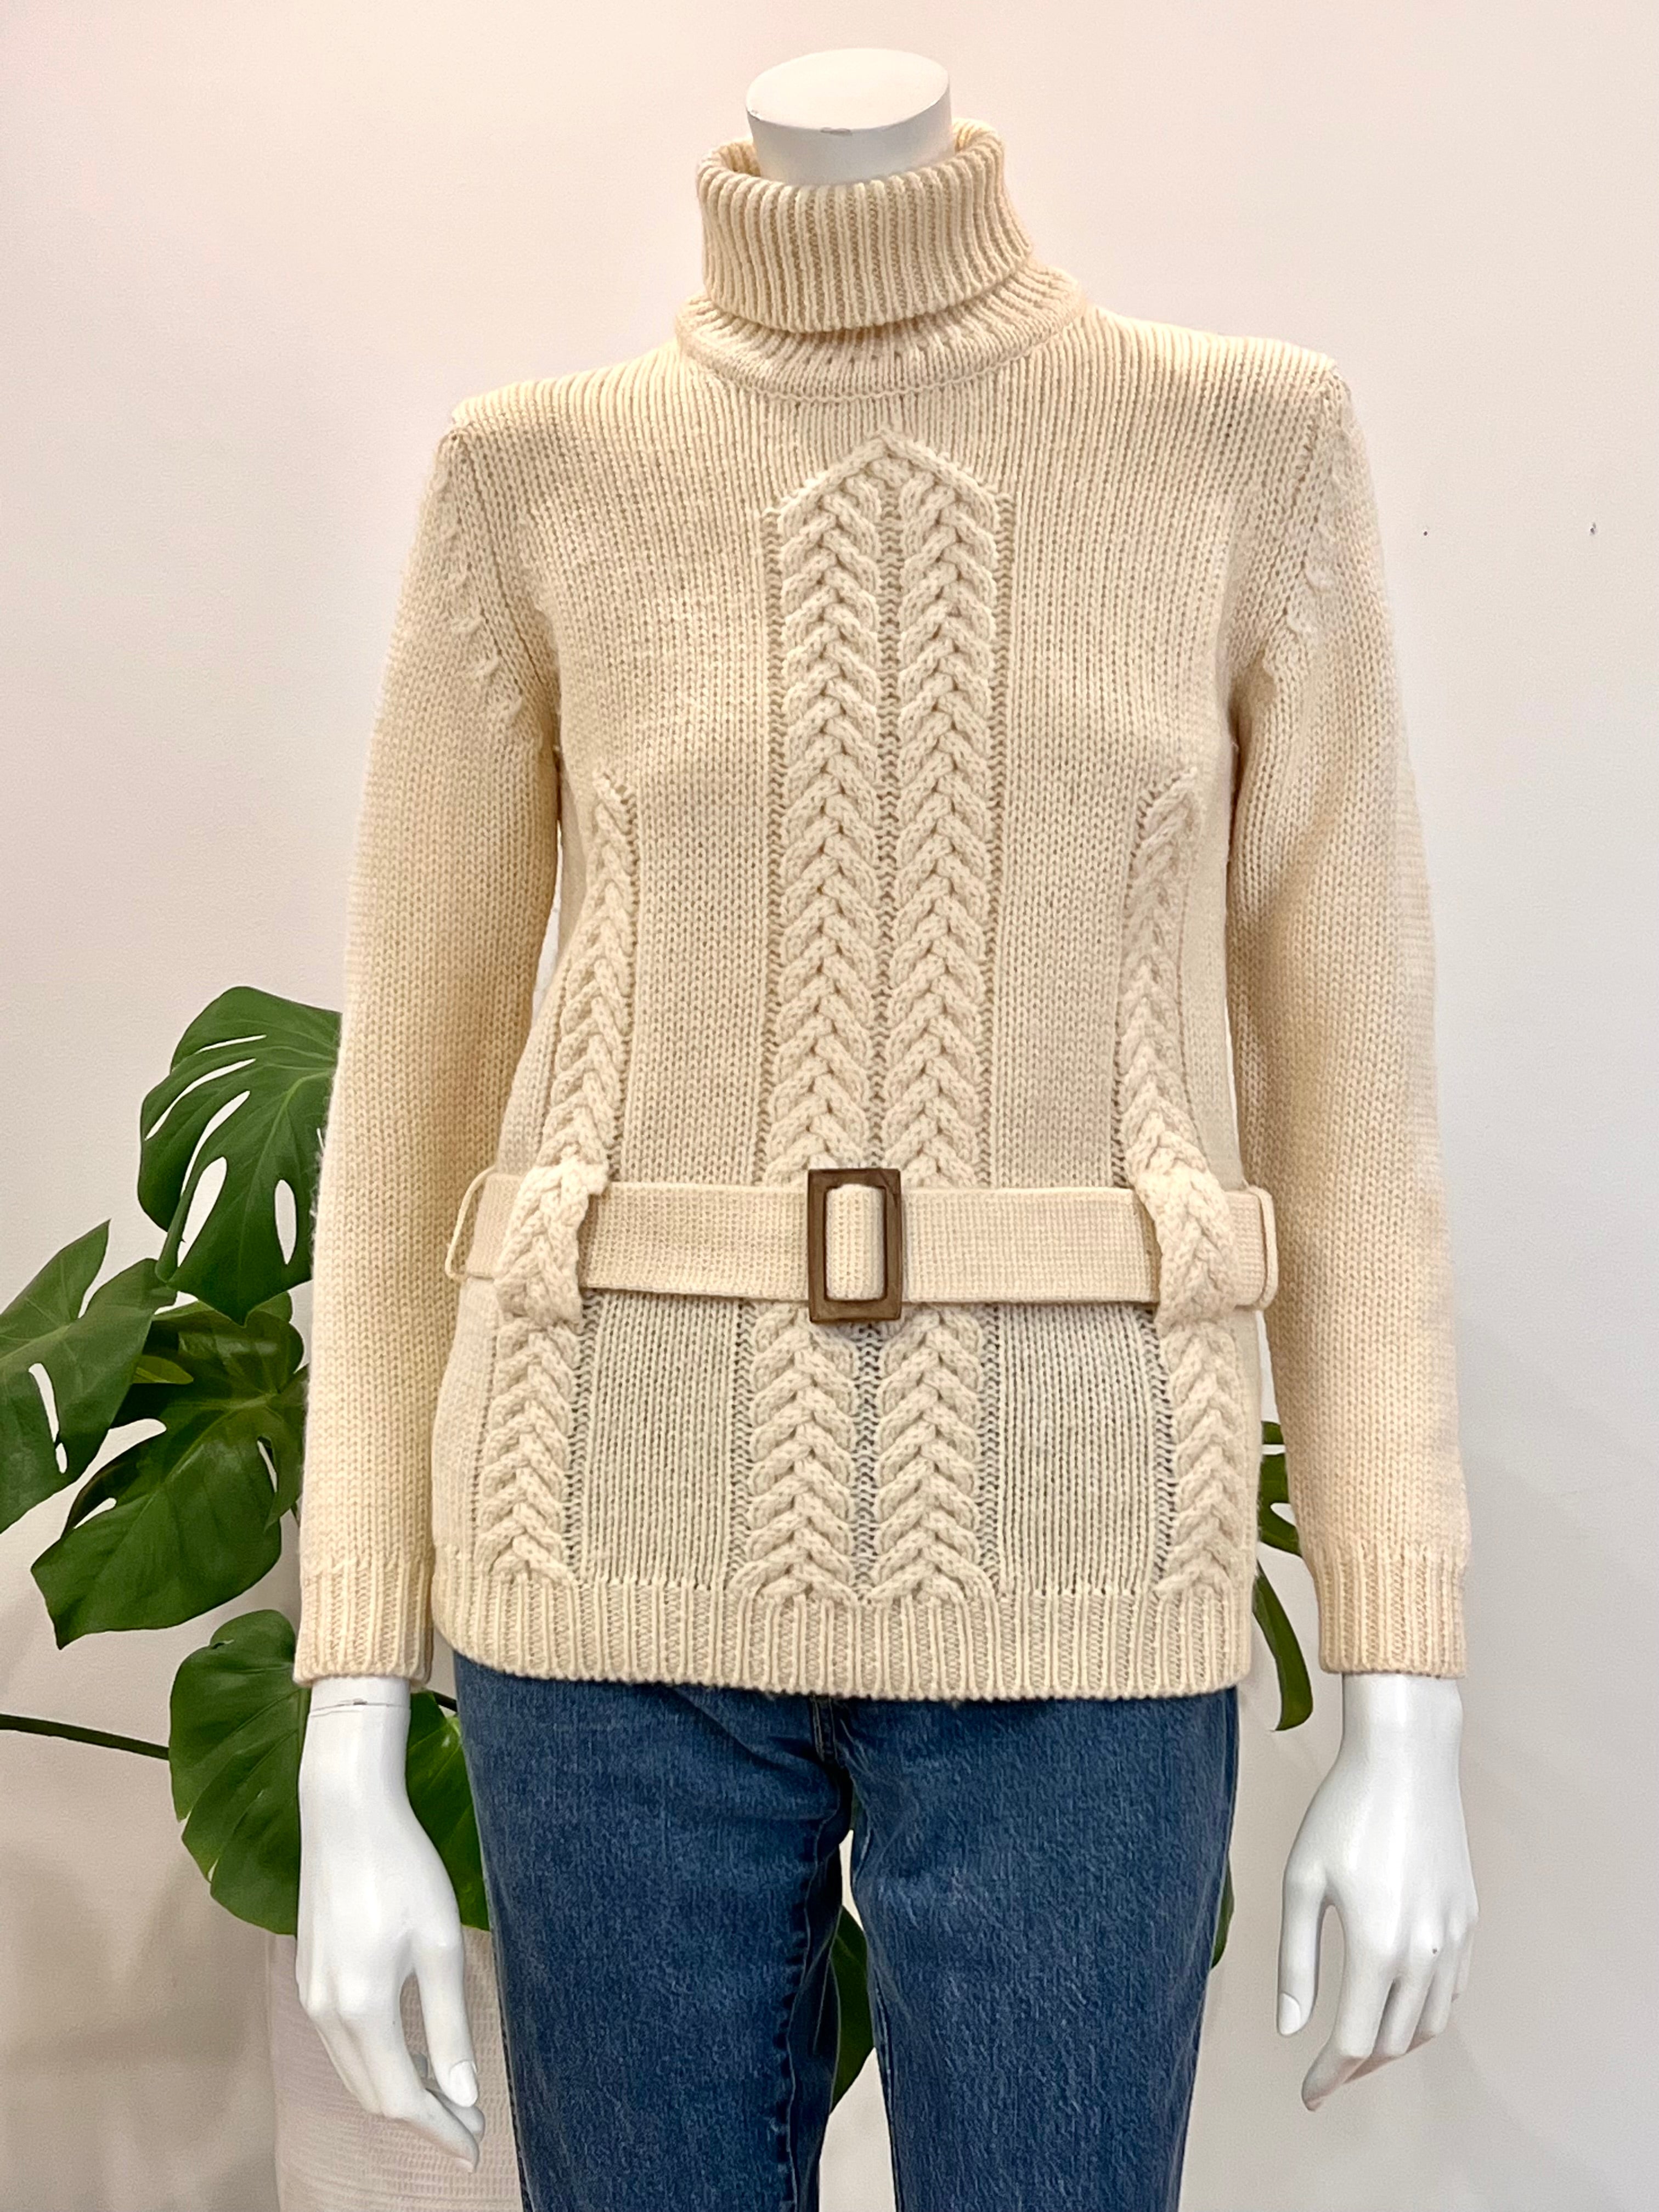 vintage ivory wool belted turtleneck cableknit sweater 70s – hong